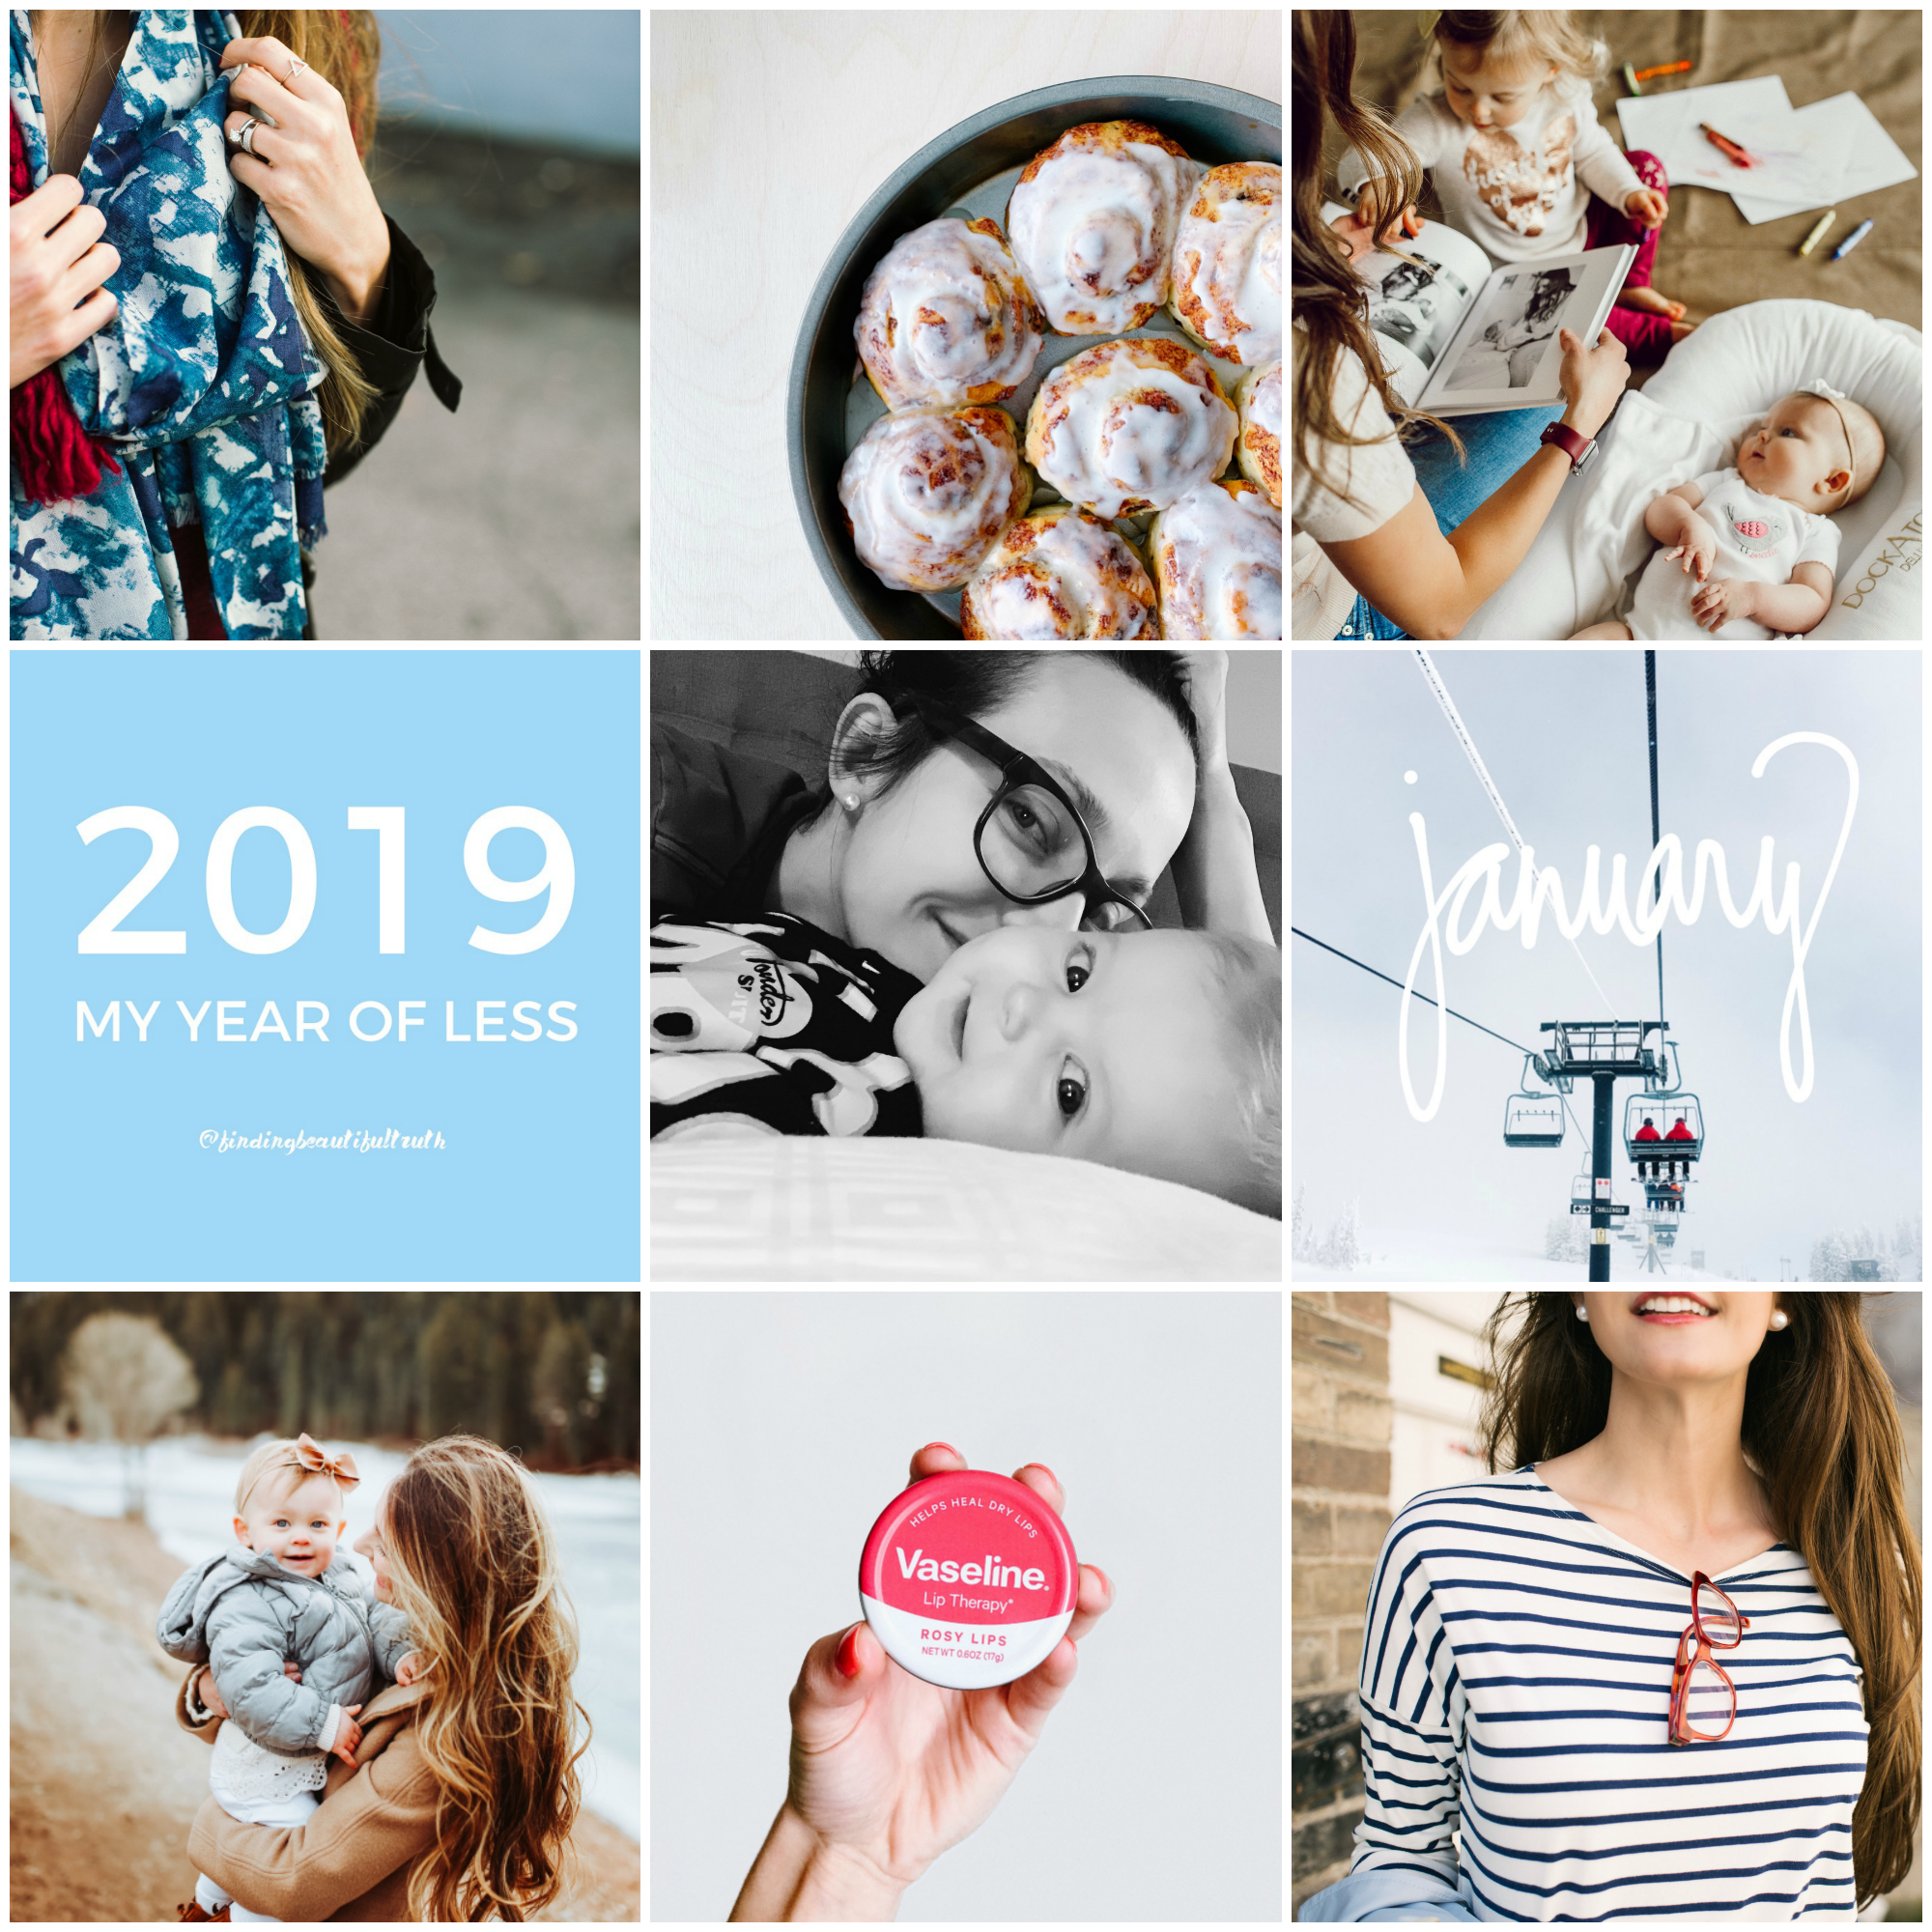 january 2019 instagram roundup | Finding Beautiful Truth